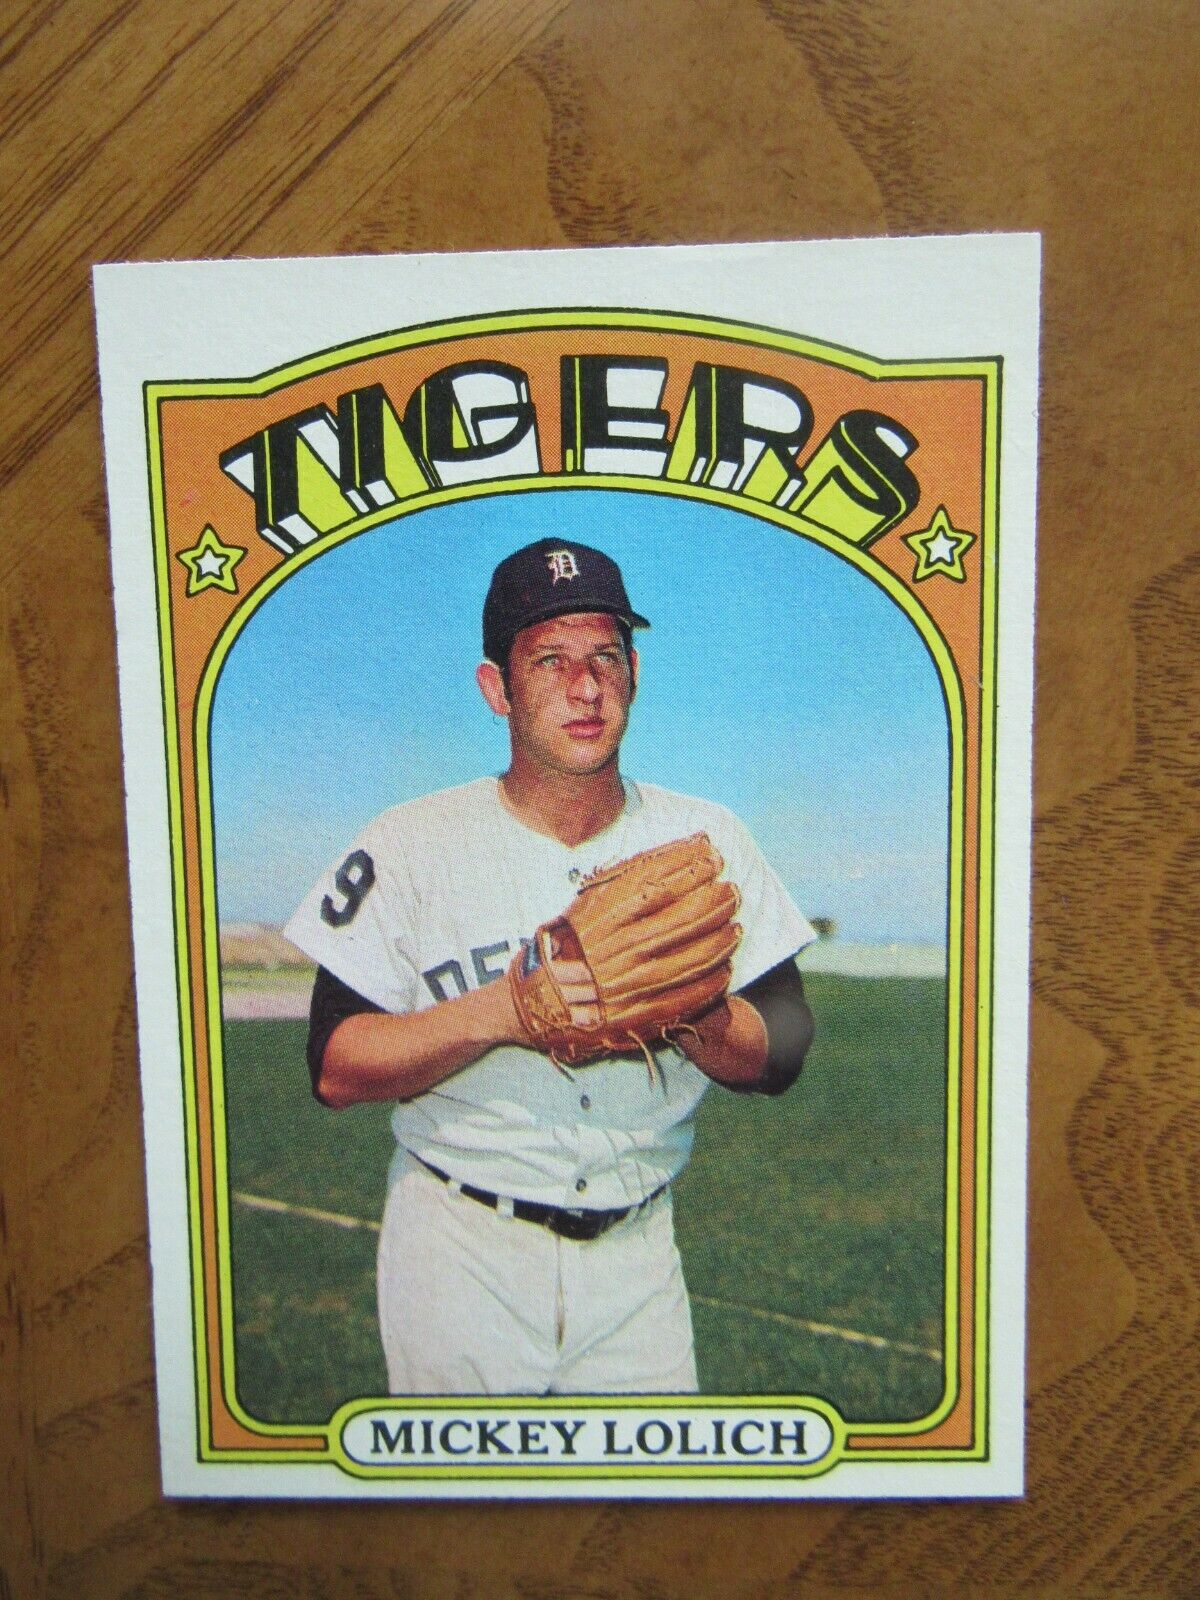 1972 Topps Baseball Cards - # 450 Mickey Lolich, P, Detroit Tigers